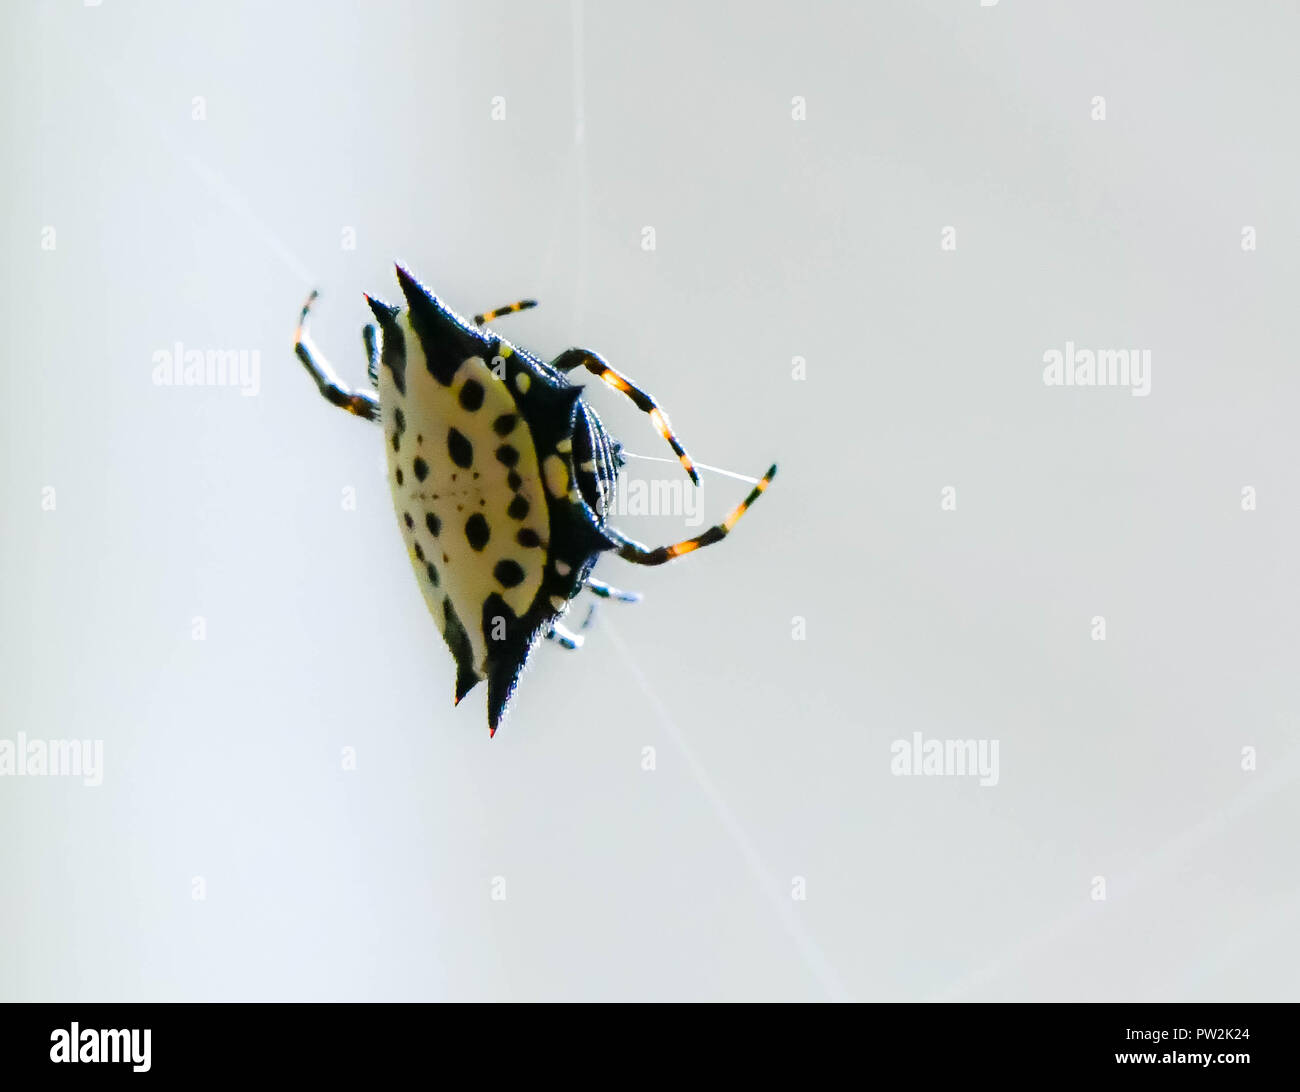 A spiny backed orb weaver spider spinning its web, Marietta, Georgia, USA Stock Photo